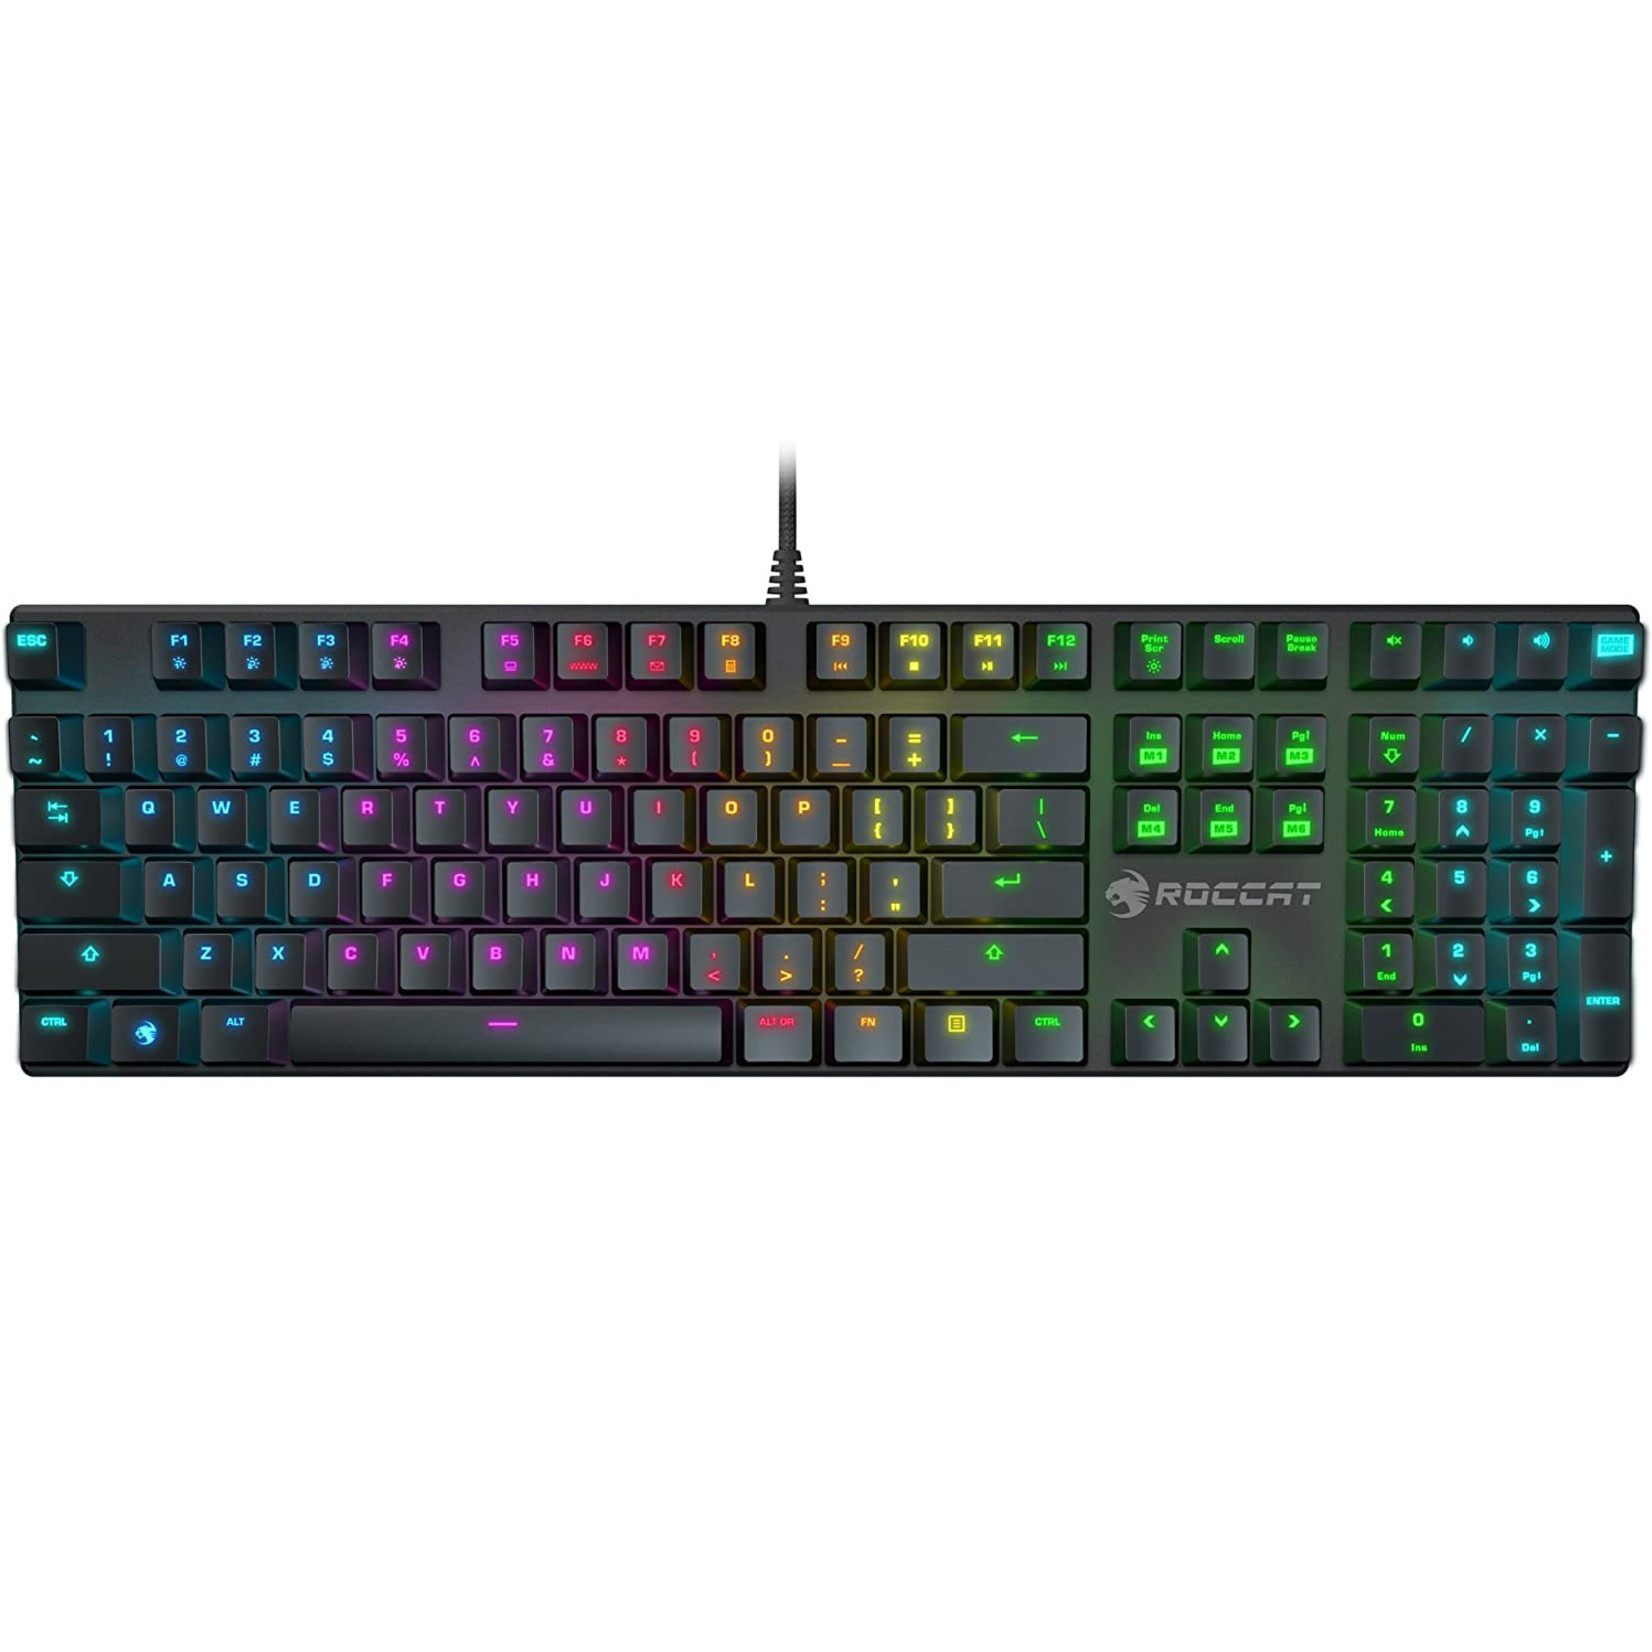 Roccat Roccat Suora FX Brown Switch Gaming Keyboard